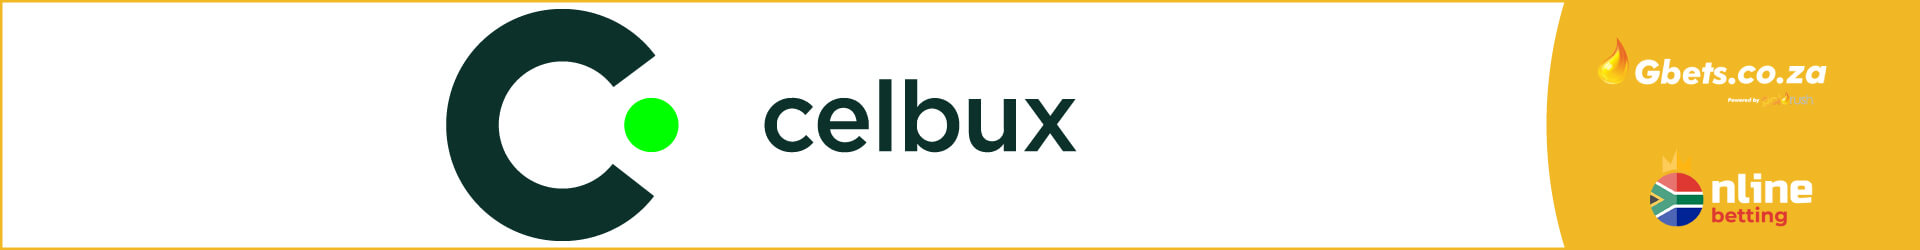 How to deposit money to Gbets using Celbux